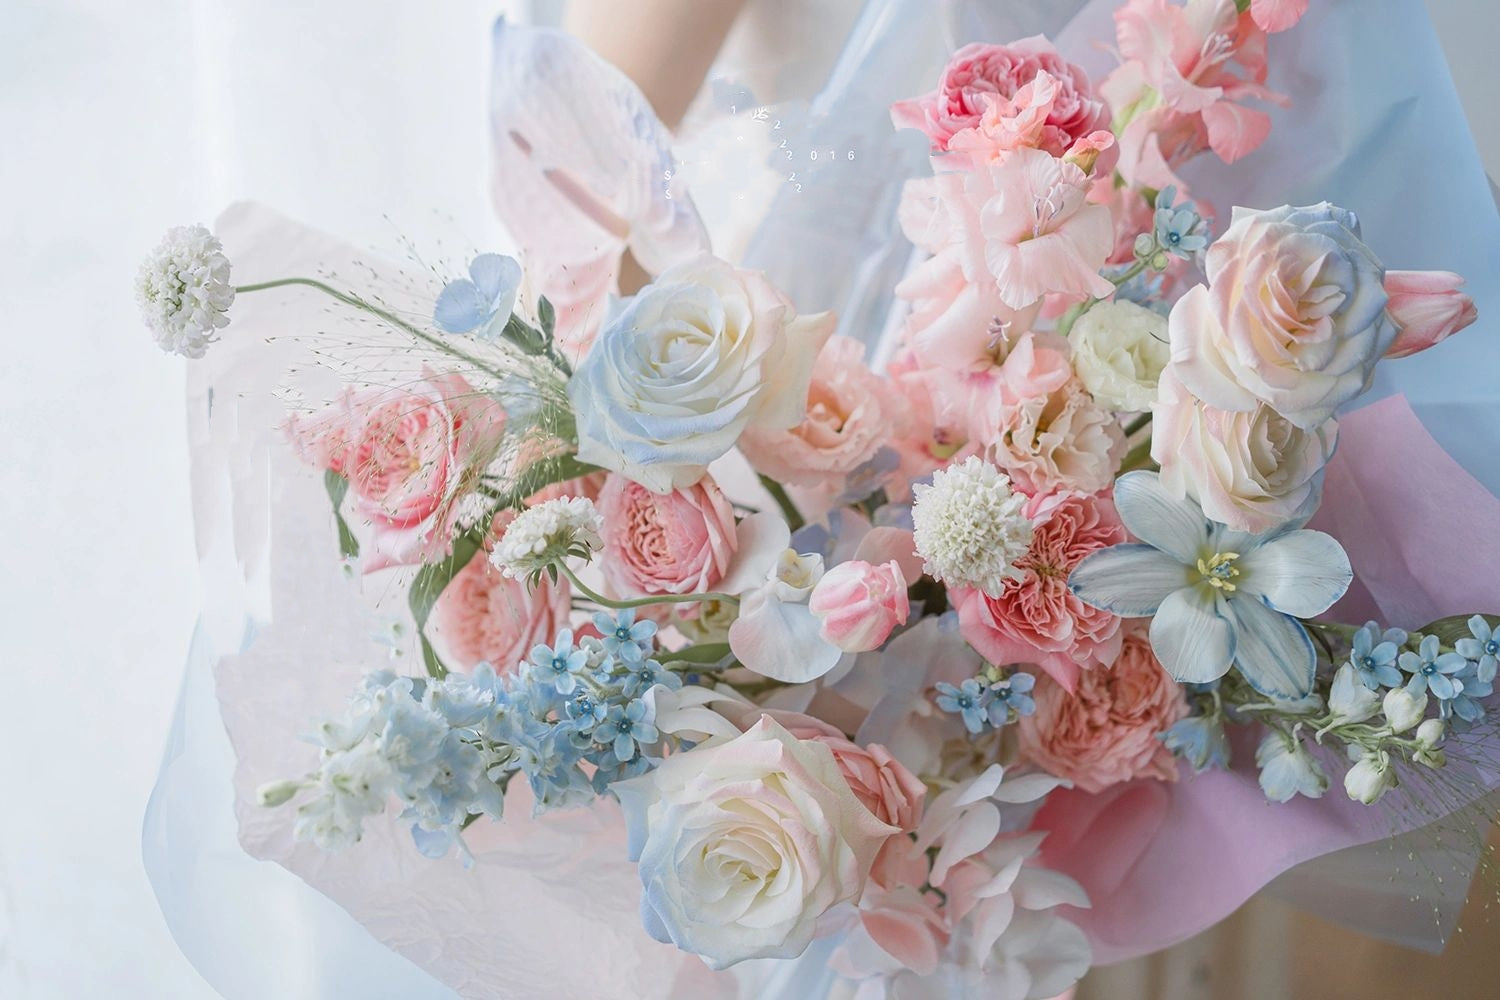 A bouquet of soft blue and pink flowers